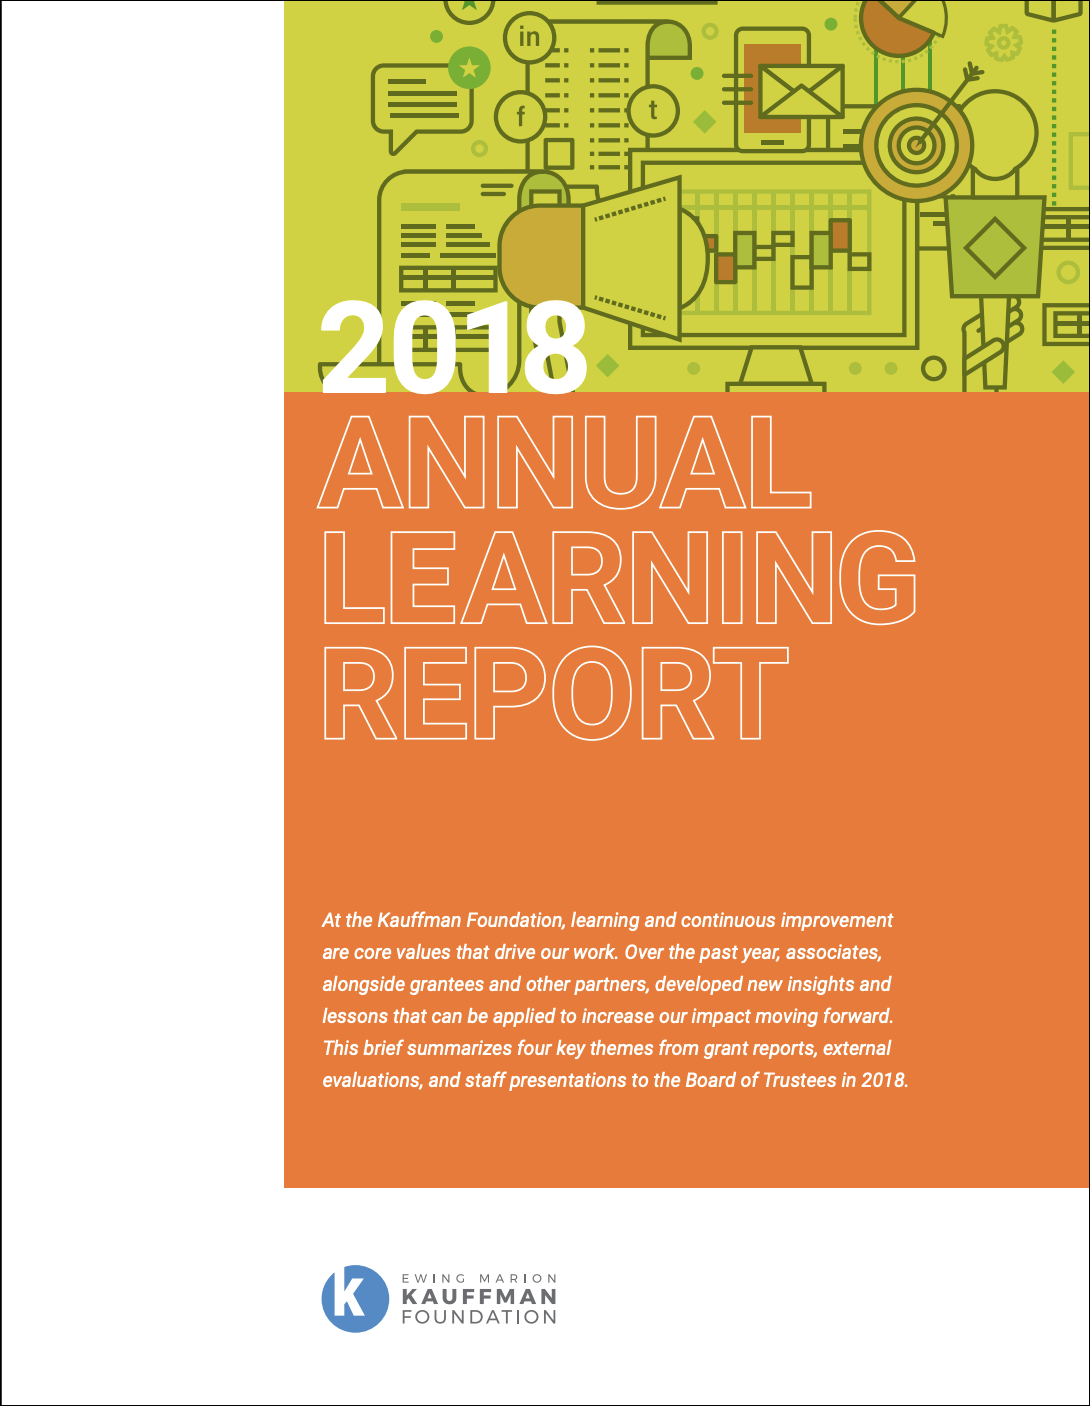 Kauffman Foundation Annual Learning Report 2018